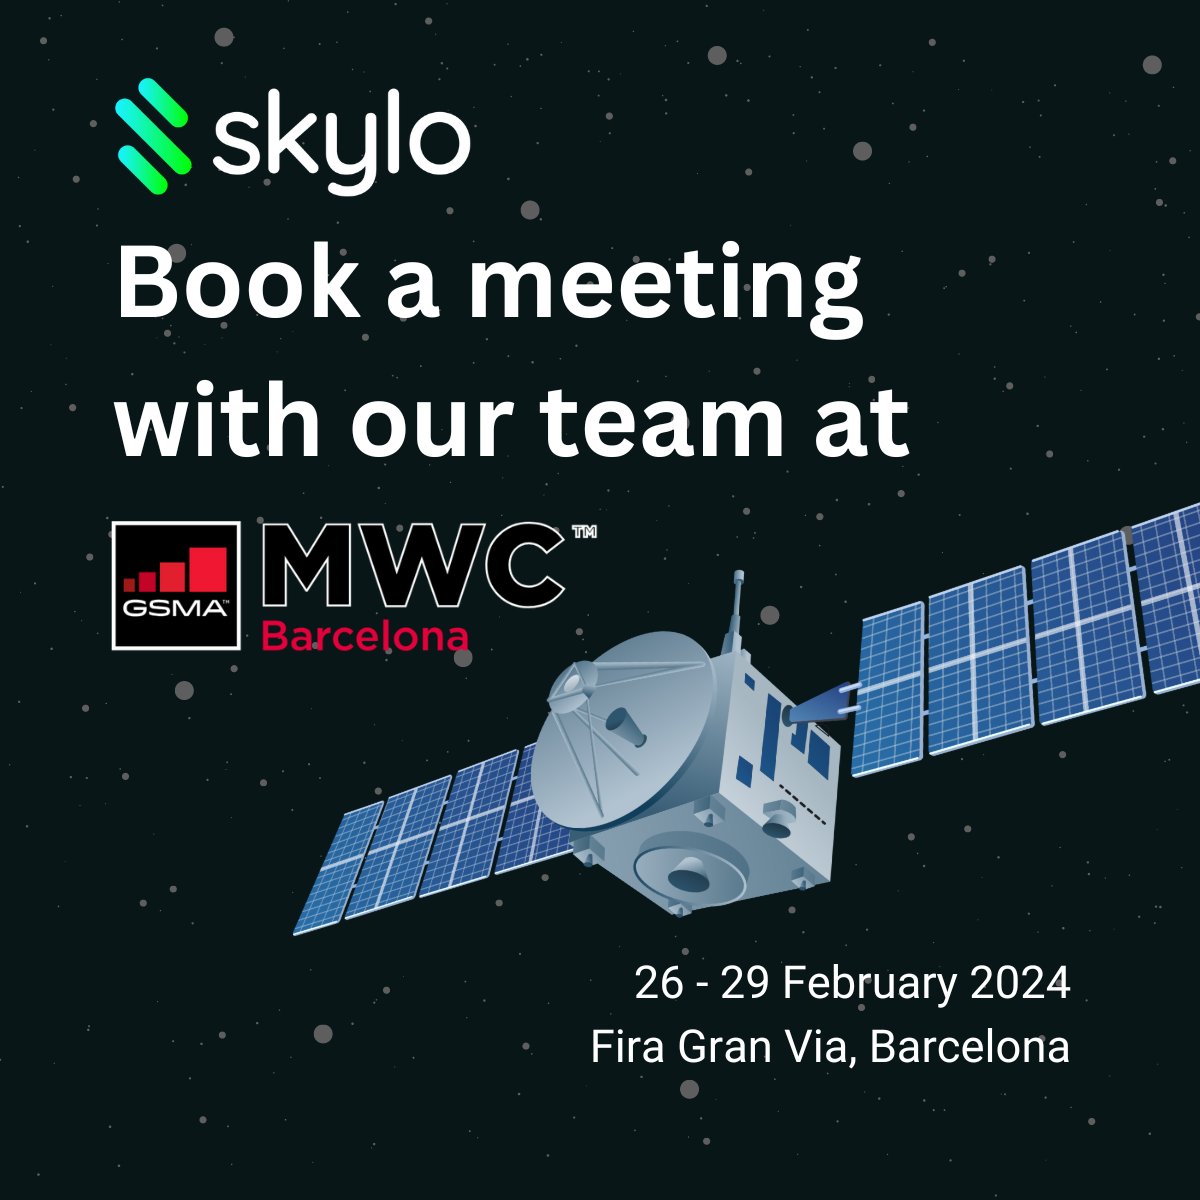 Attending #MWC2024 in Barcelona? Whether you're a carrier, device manufacturer, press, or an analyst, schedule a call with our team today to discuss potentially working together. calendly.com/skylo/mwc-2024